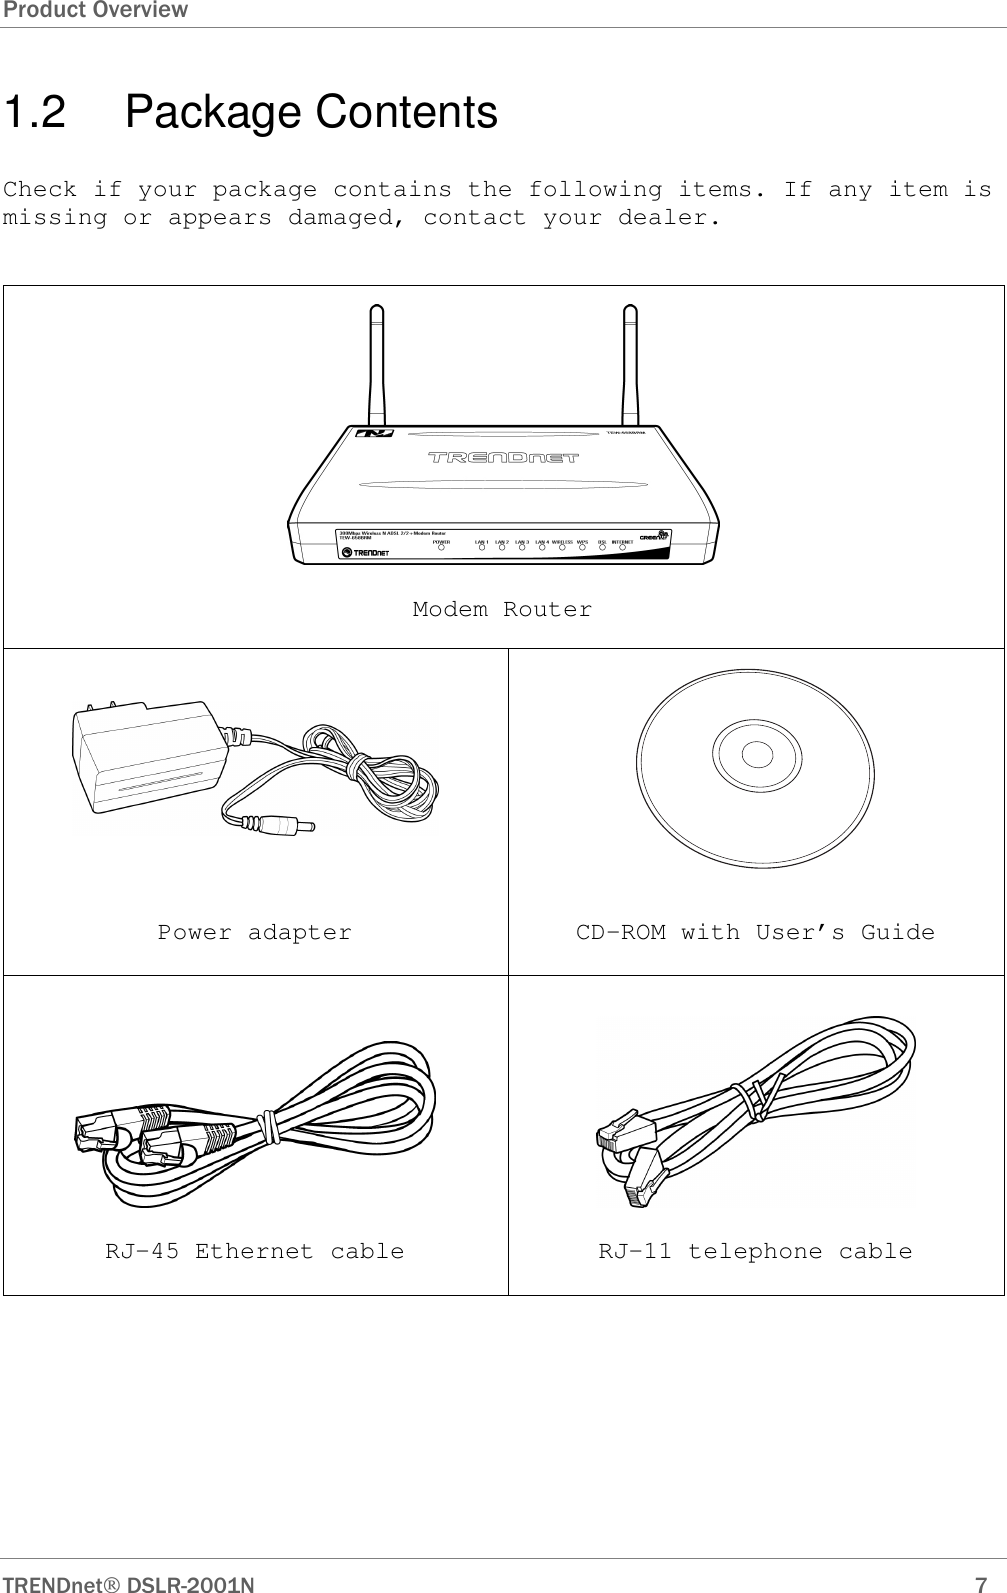 Product Overview  TRENDnet DSLR-2001N        7 1.2  Package Contents Check if your package contains the following items. If any item is missing or appears damaged, contact your dealer.   Modem Router   Power adapter  CD-ROM with User’s Guide    RJ-45 Ethernet cable  RJ-11 telephone cable  